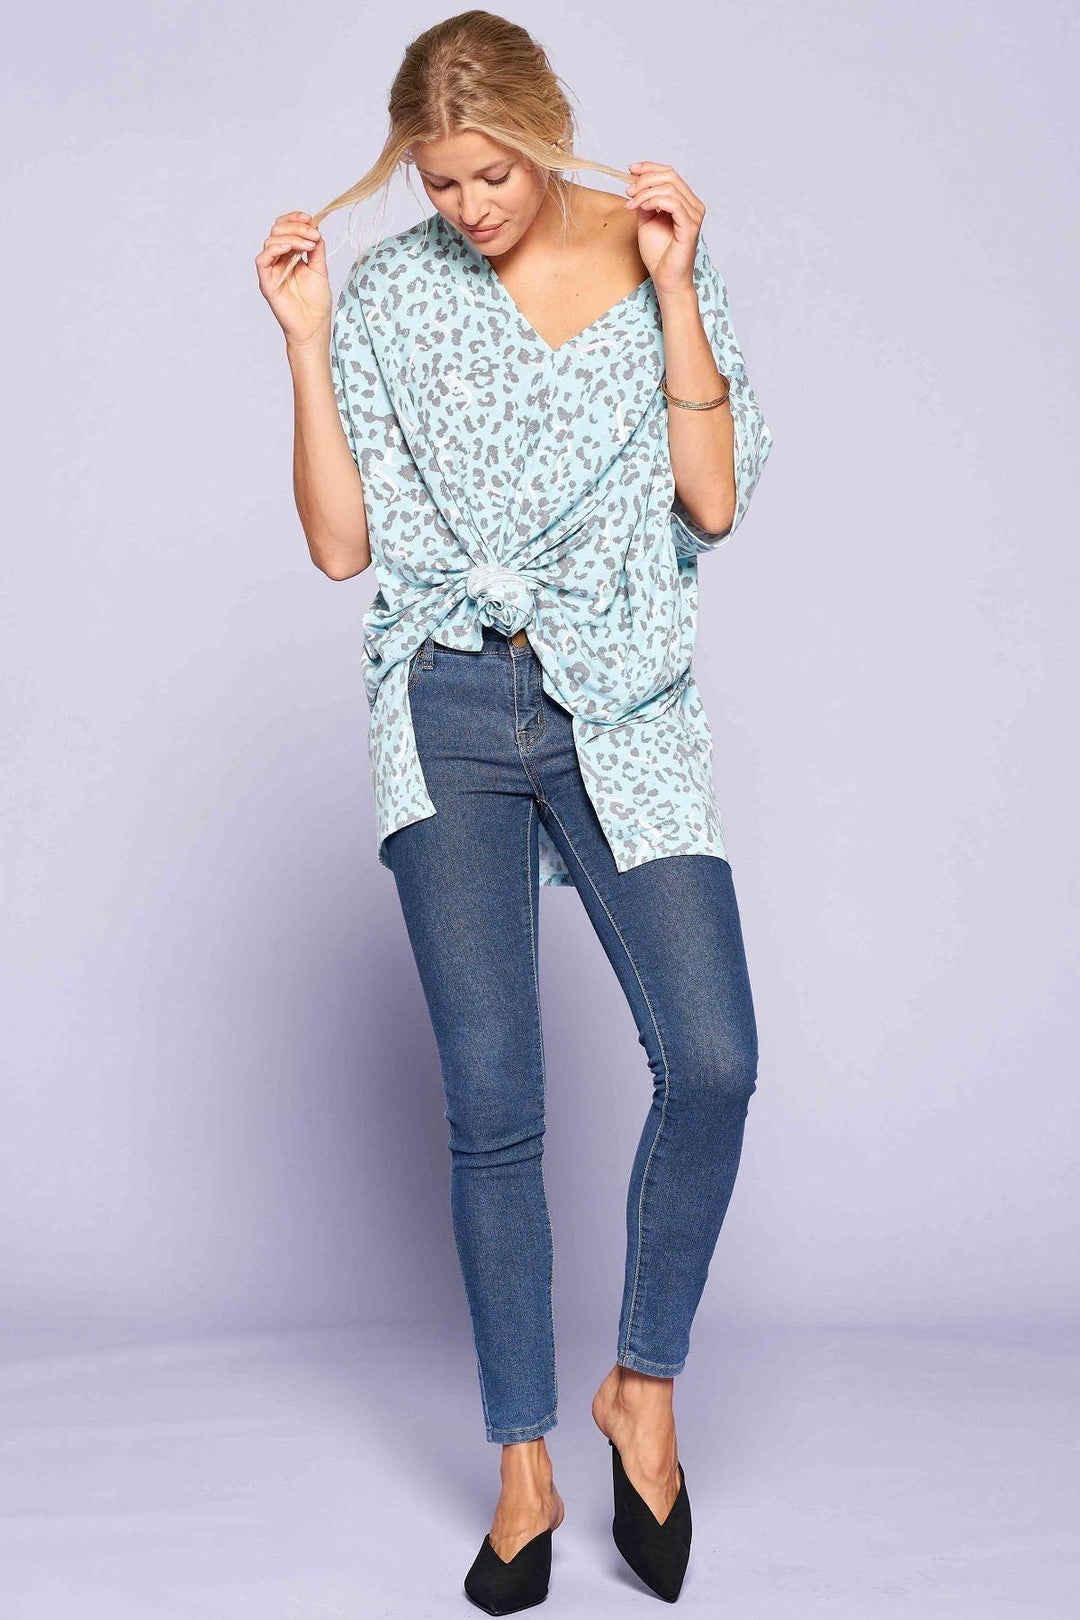 Leopard And Letter Printed Knit Top in Mint/Blue